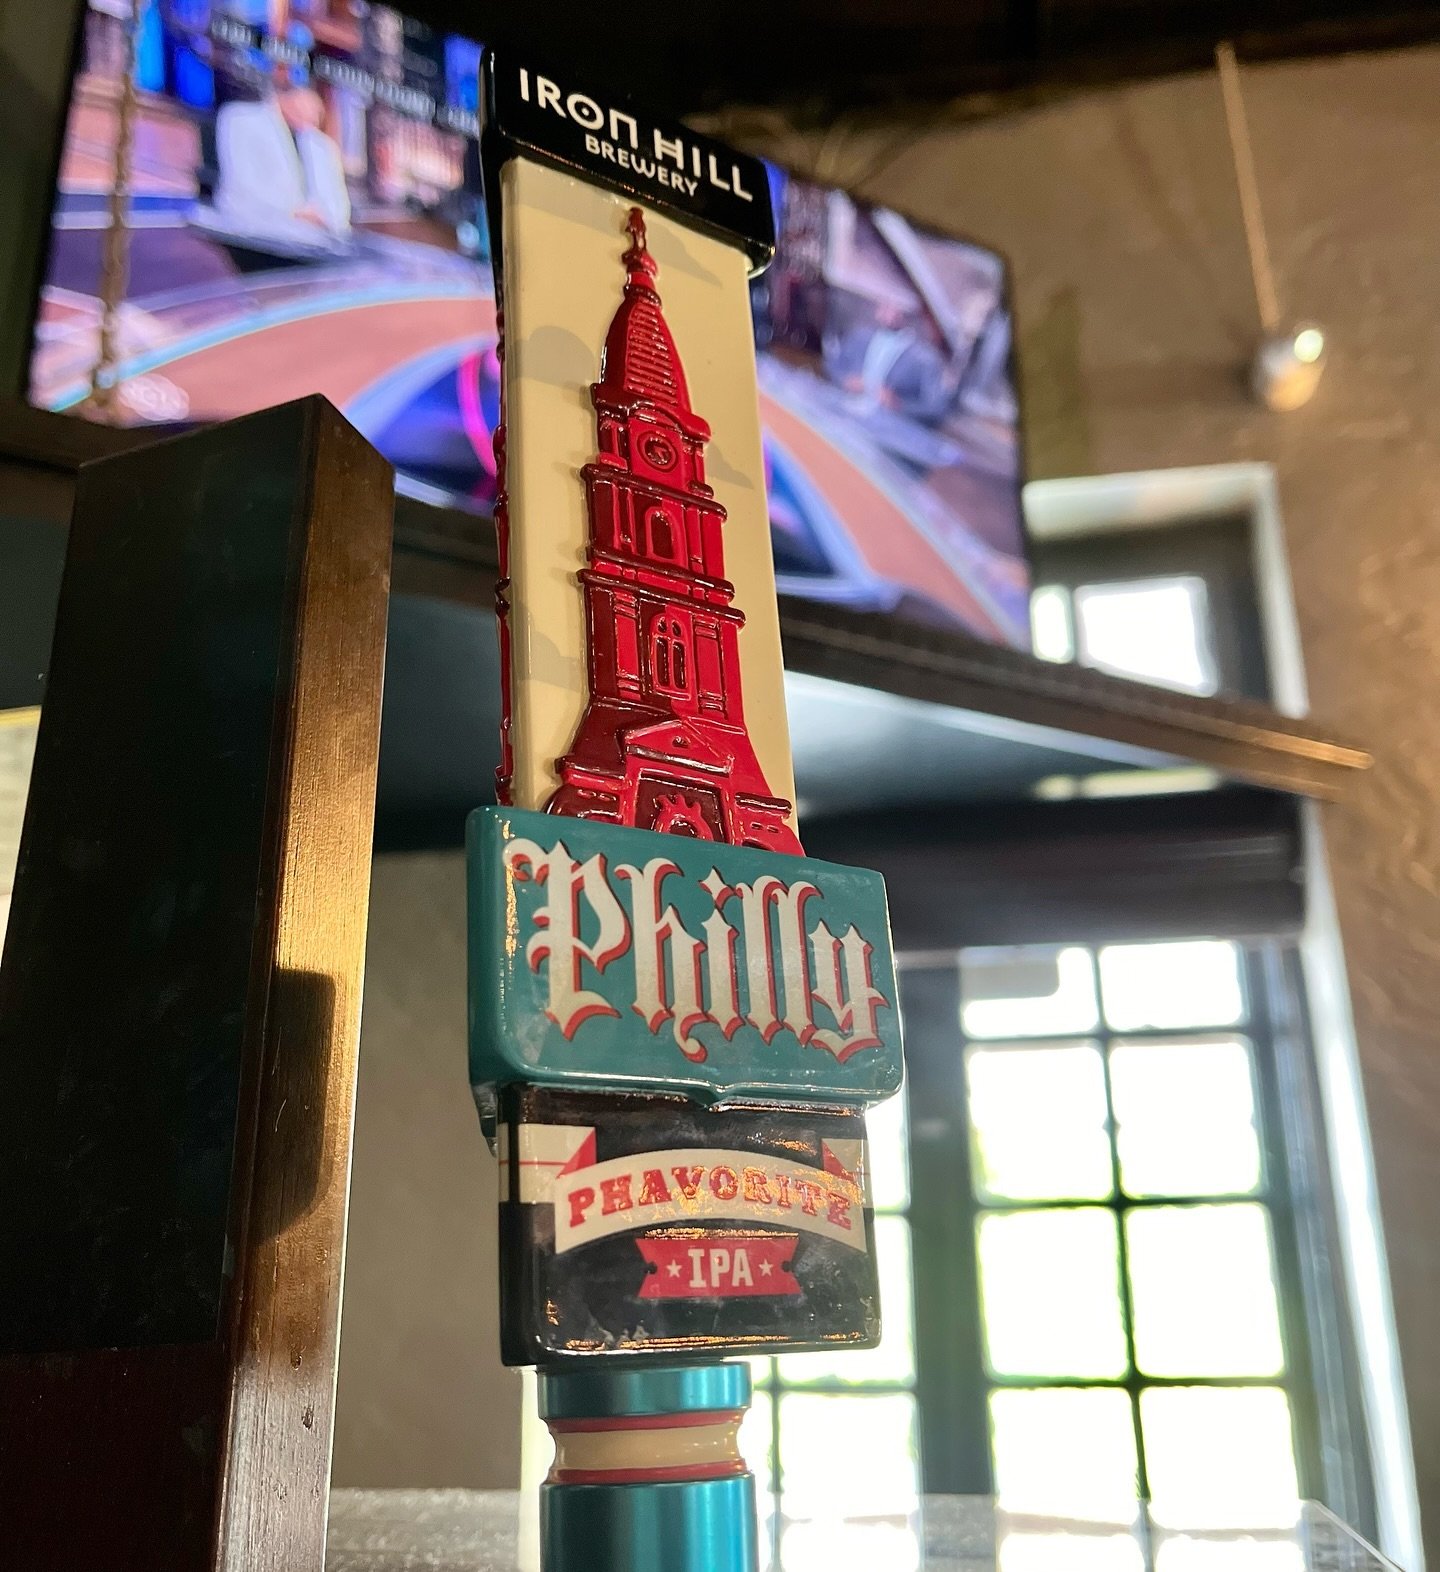 Playoff 76ers on at 1:00. Phillies on at 4:10. $4 Philly Phavorite IPA draft during all Phillies games. 
Come grab a cold one today 🍻